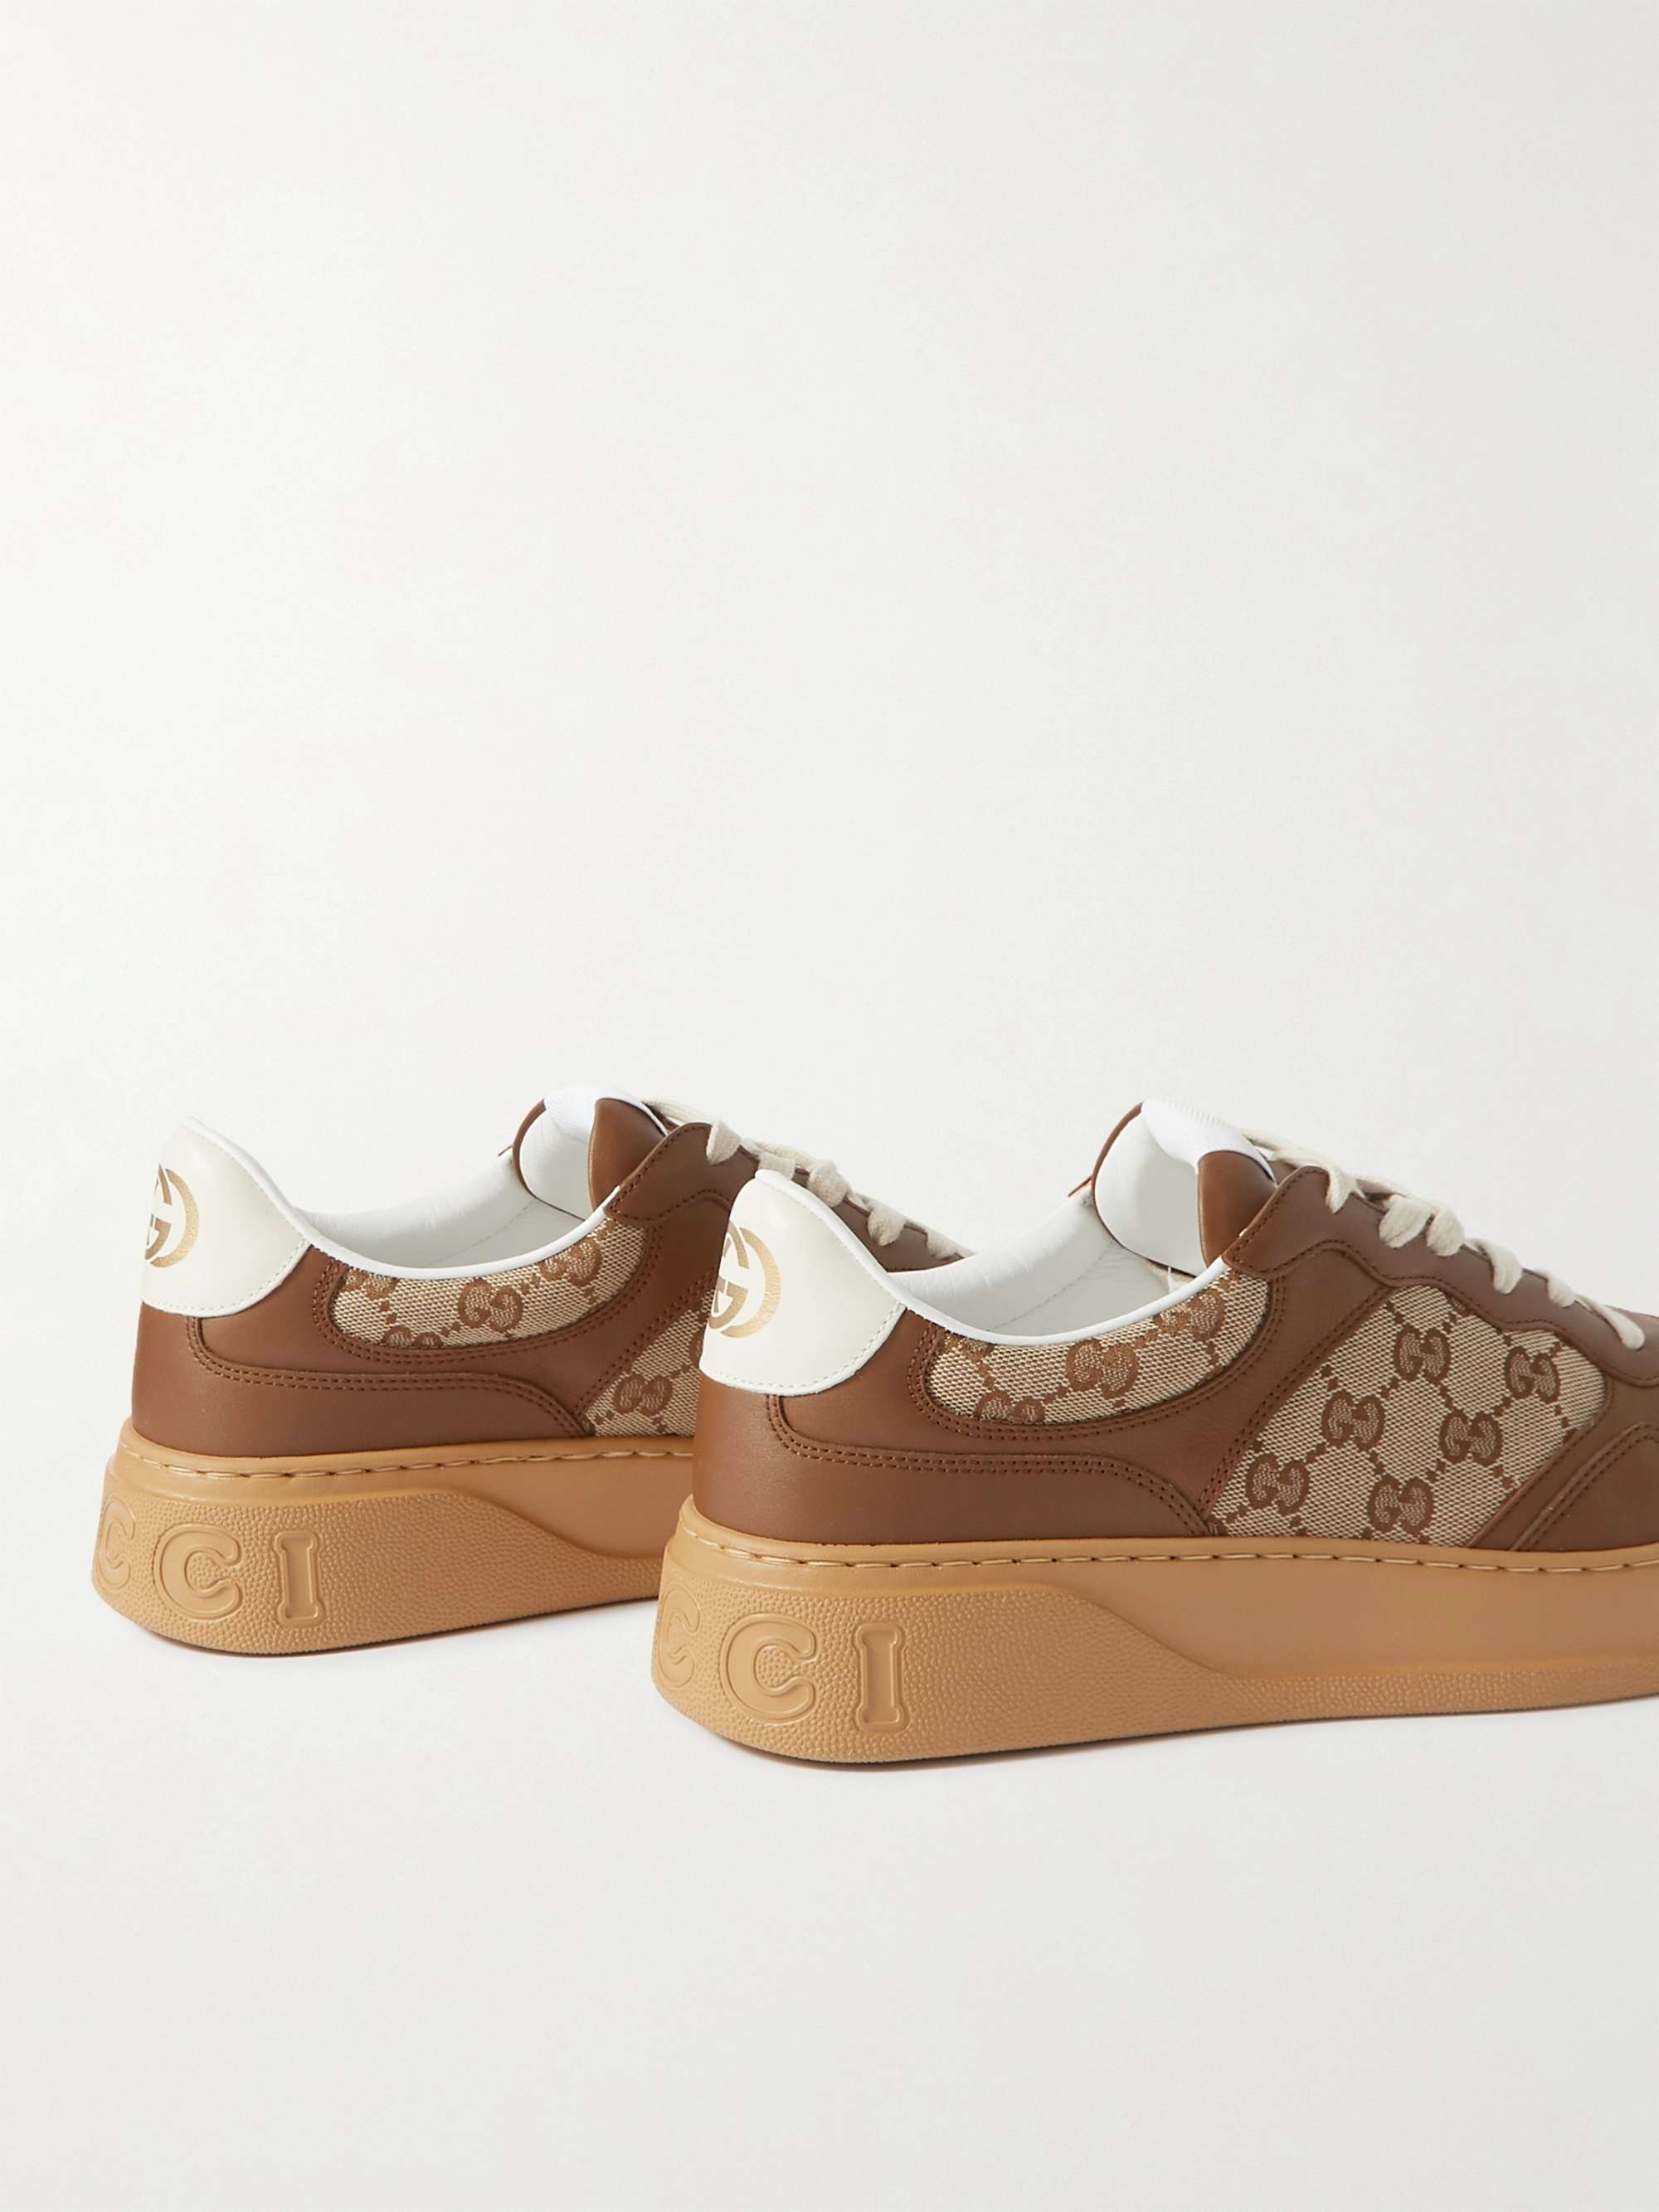 GUCCI Jive Monogrammed Canvas and Leather Sneakers